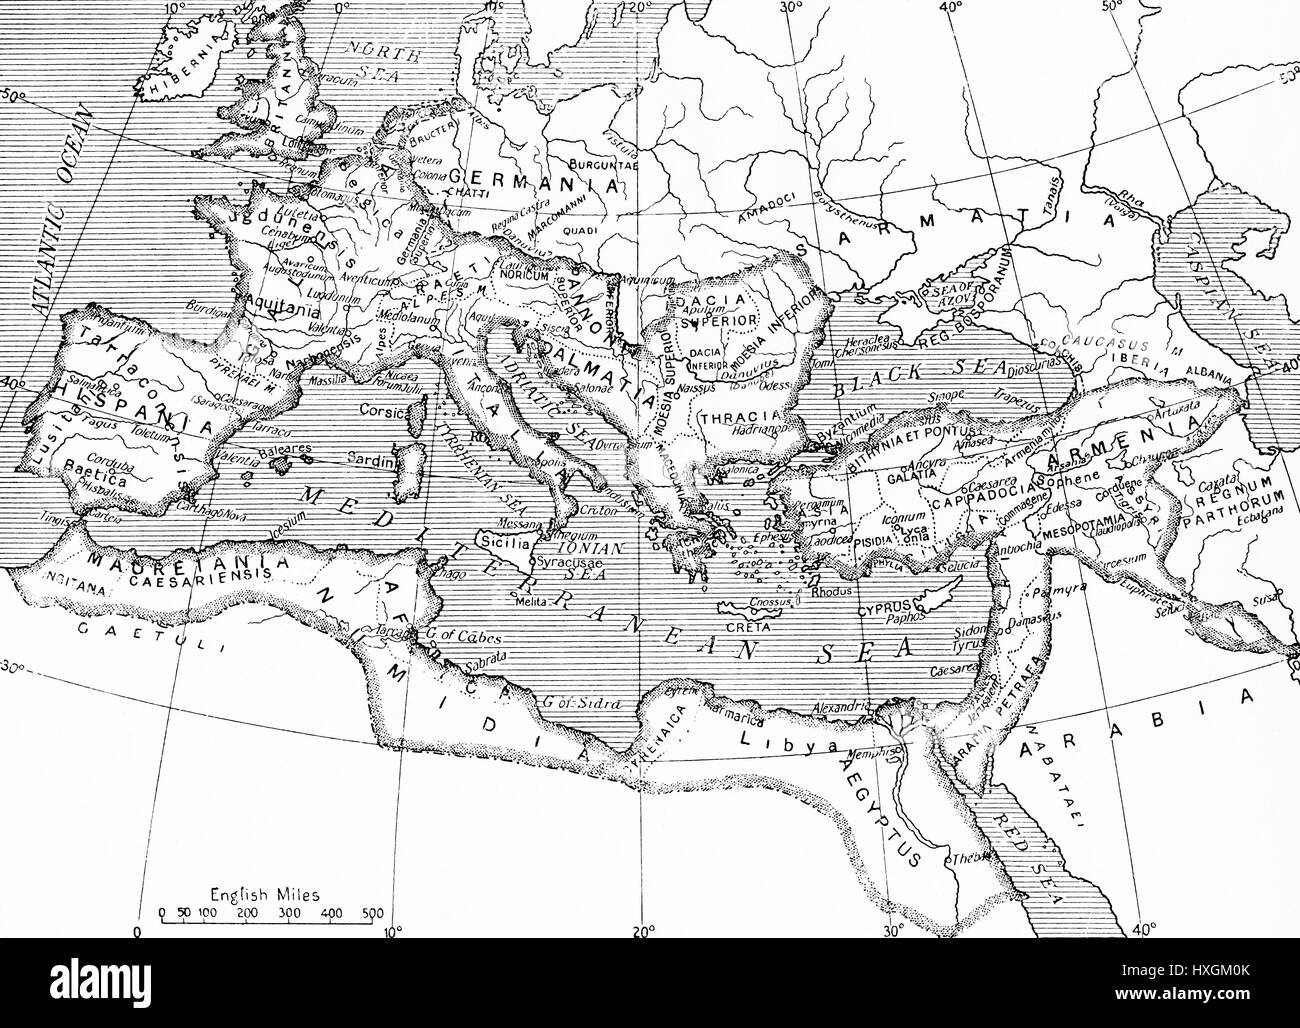 Map of the Roman Empire 14 AD - 117 AD.  From Hutchinson's History of the Nations, published 1915. Stock Photo